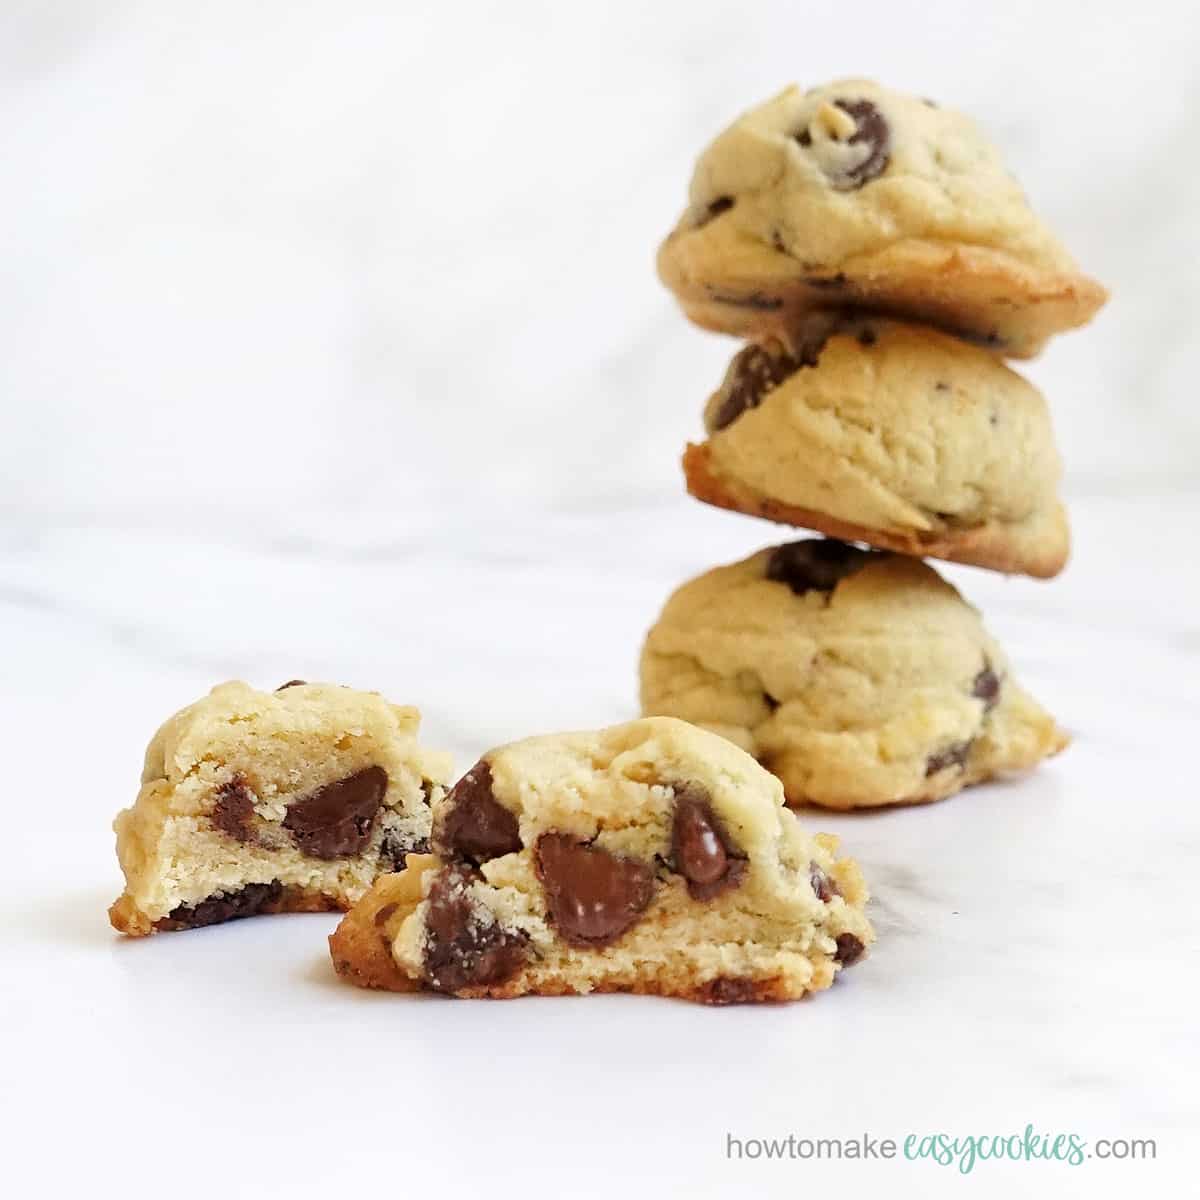 stack of chocolate chip pudding cookies